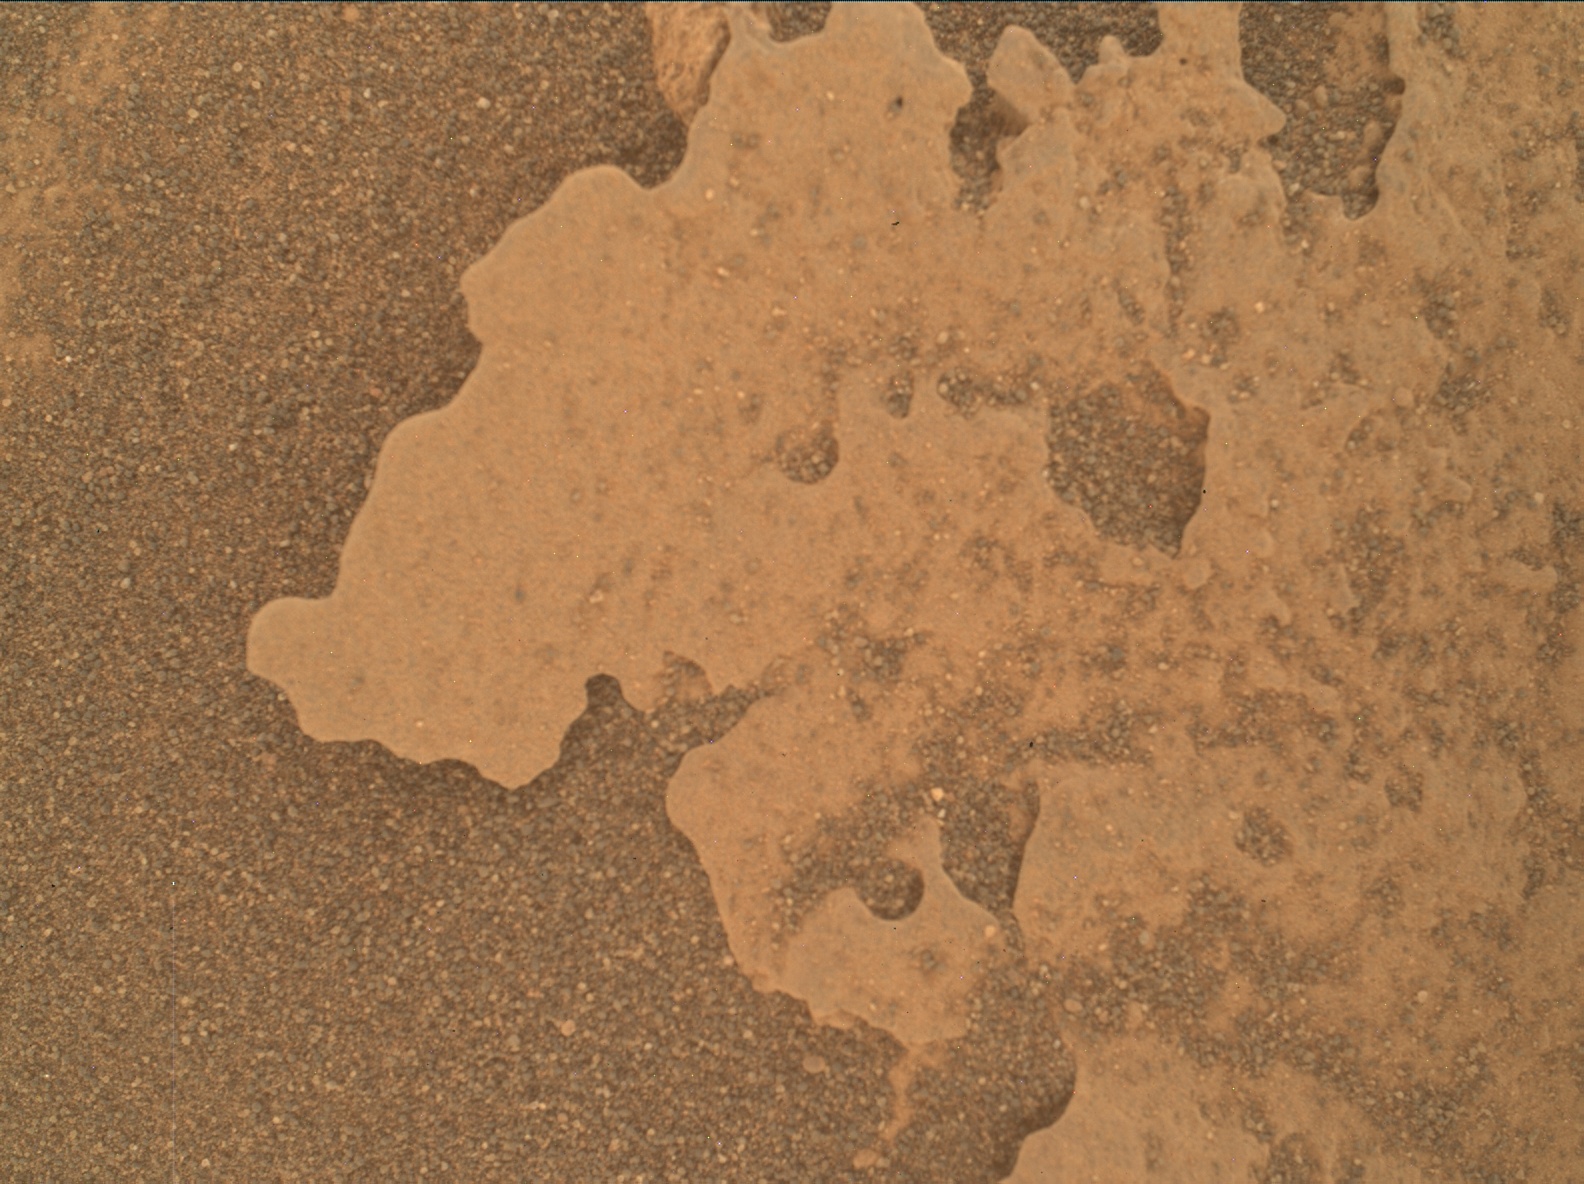 Nasa's Mars rover Curiosity acquired this image using its Mars Hand Lens Imager (MAHLI) on Sol 3204